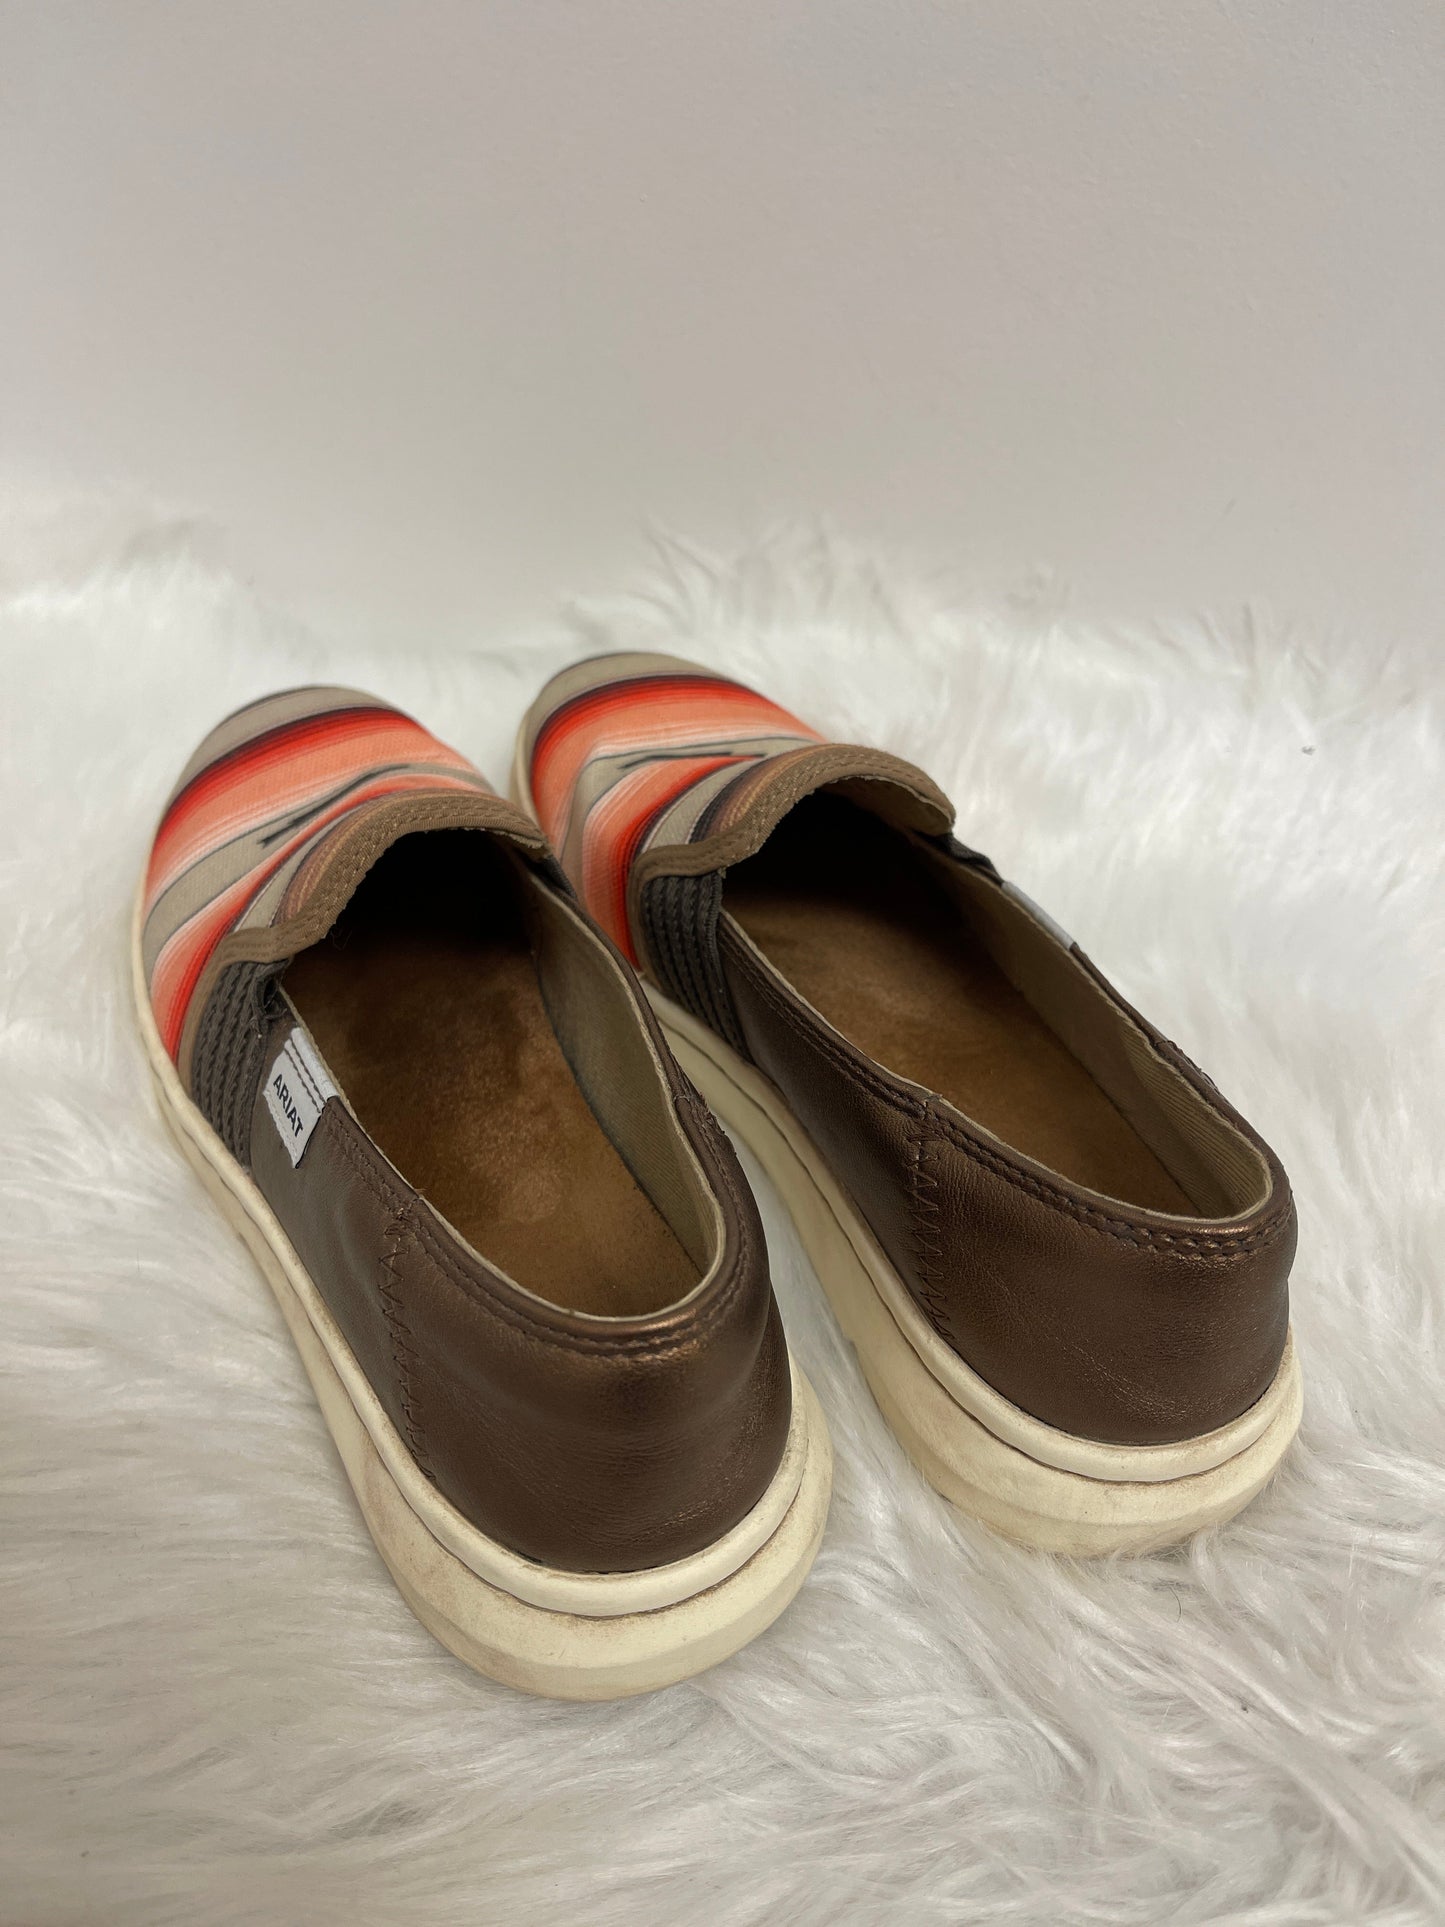 Multi-colored Shoes Flats Ariat, Size 7.5